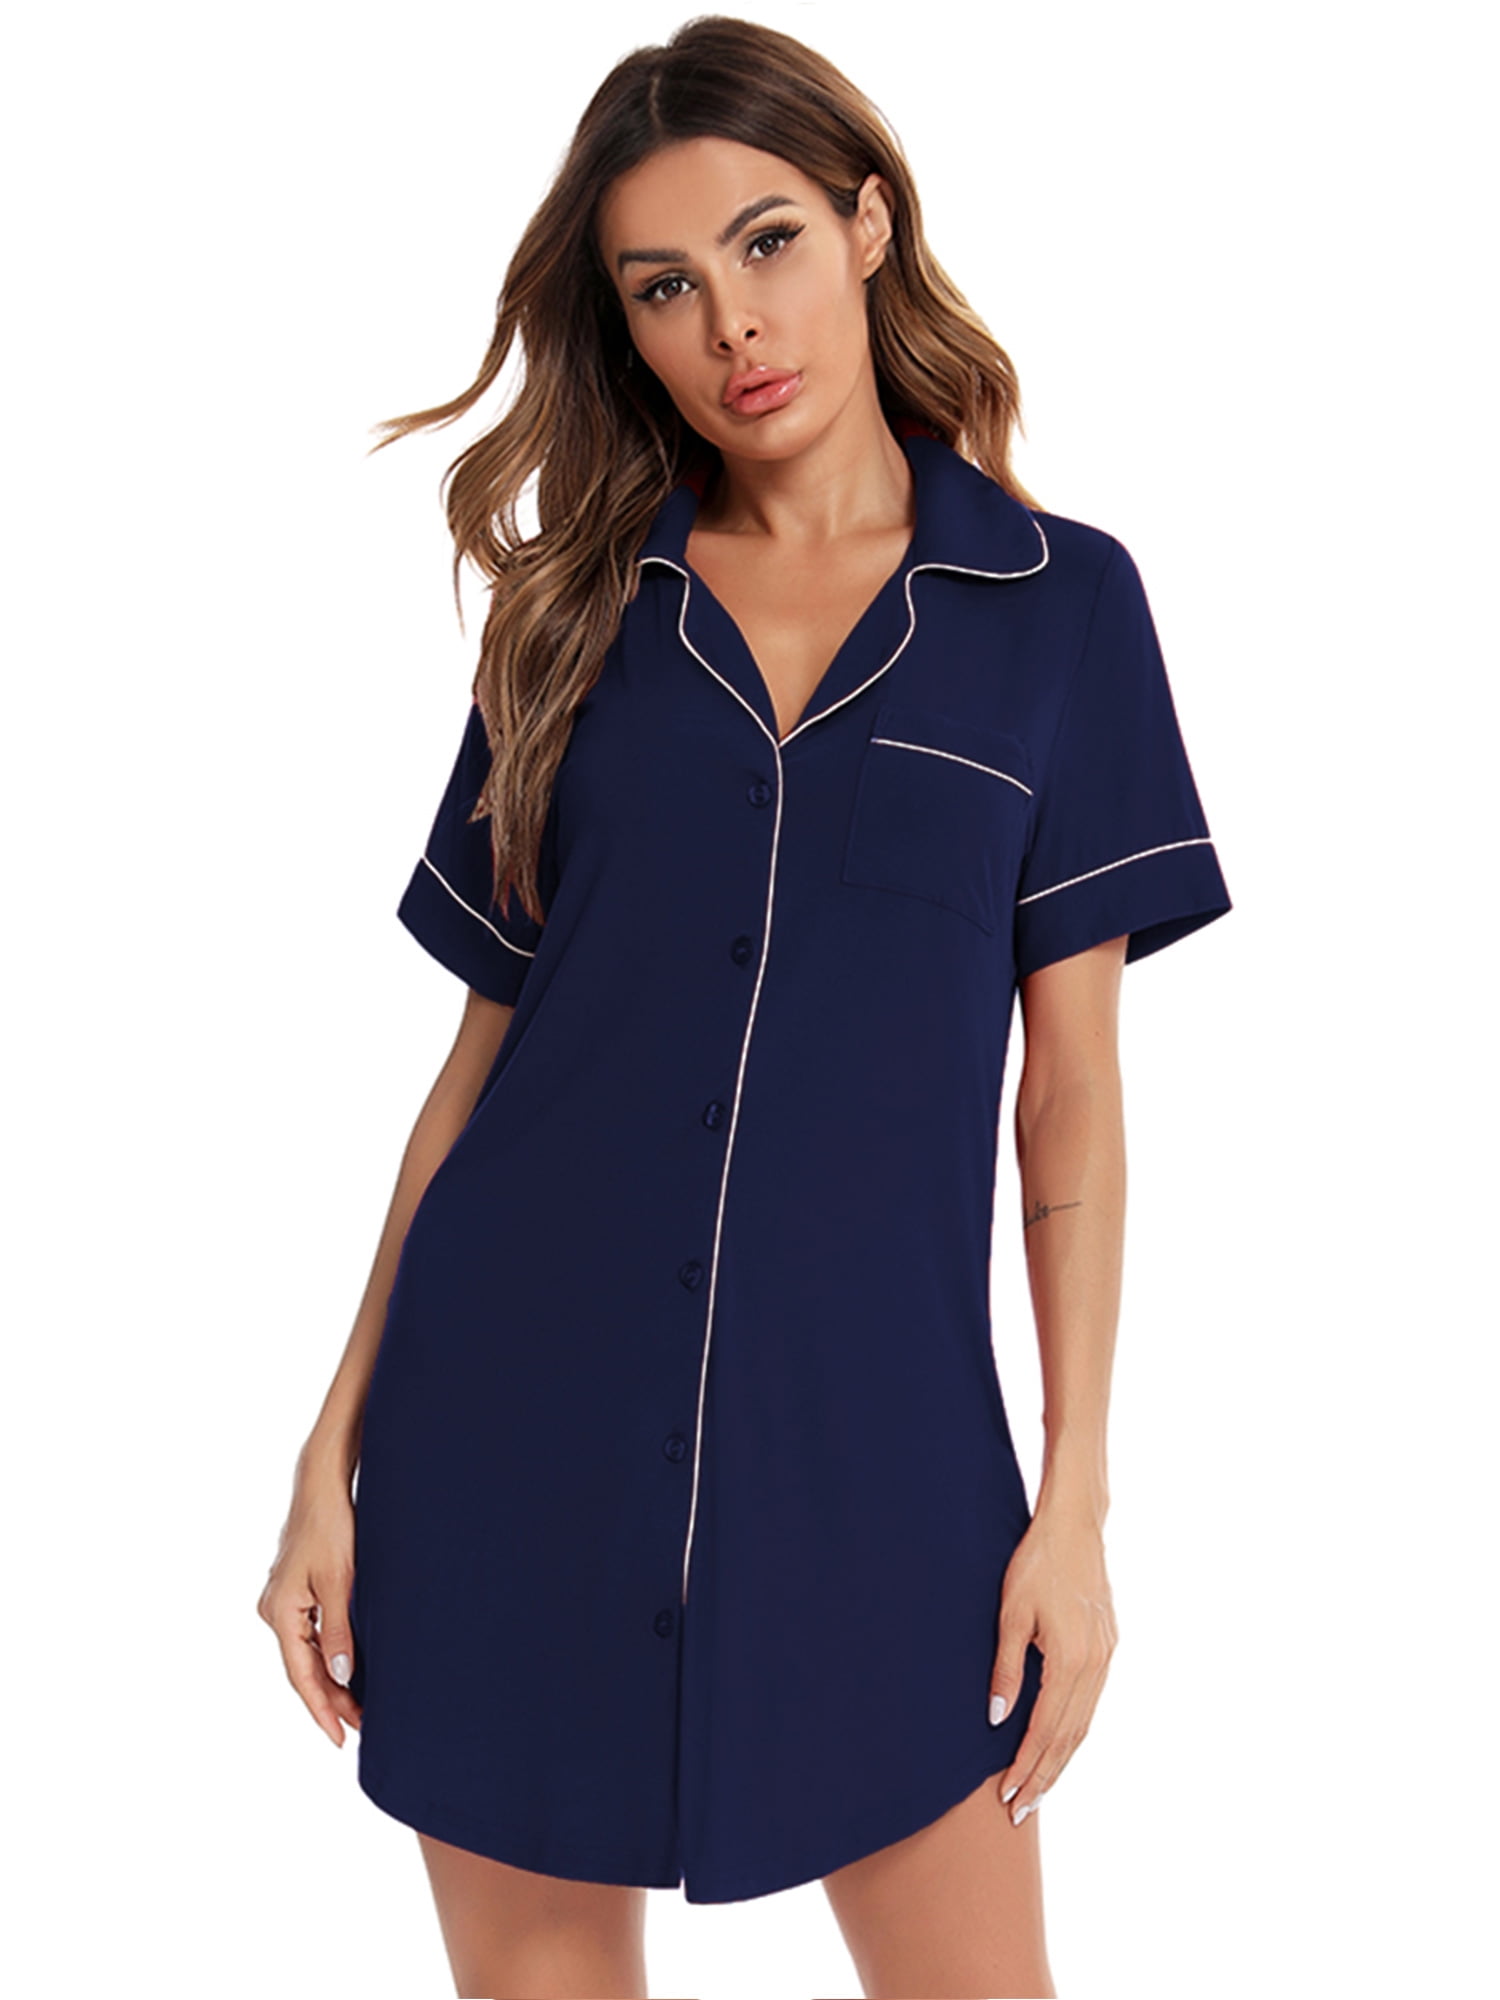 Buy > light blue button down dress > in stock